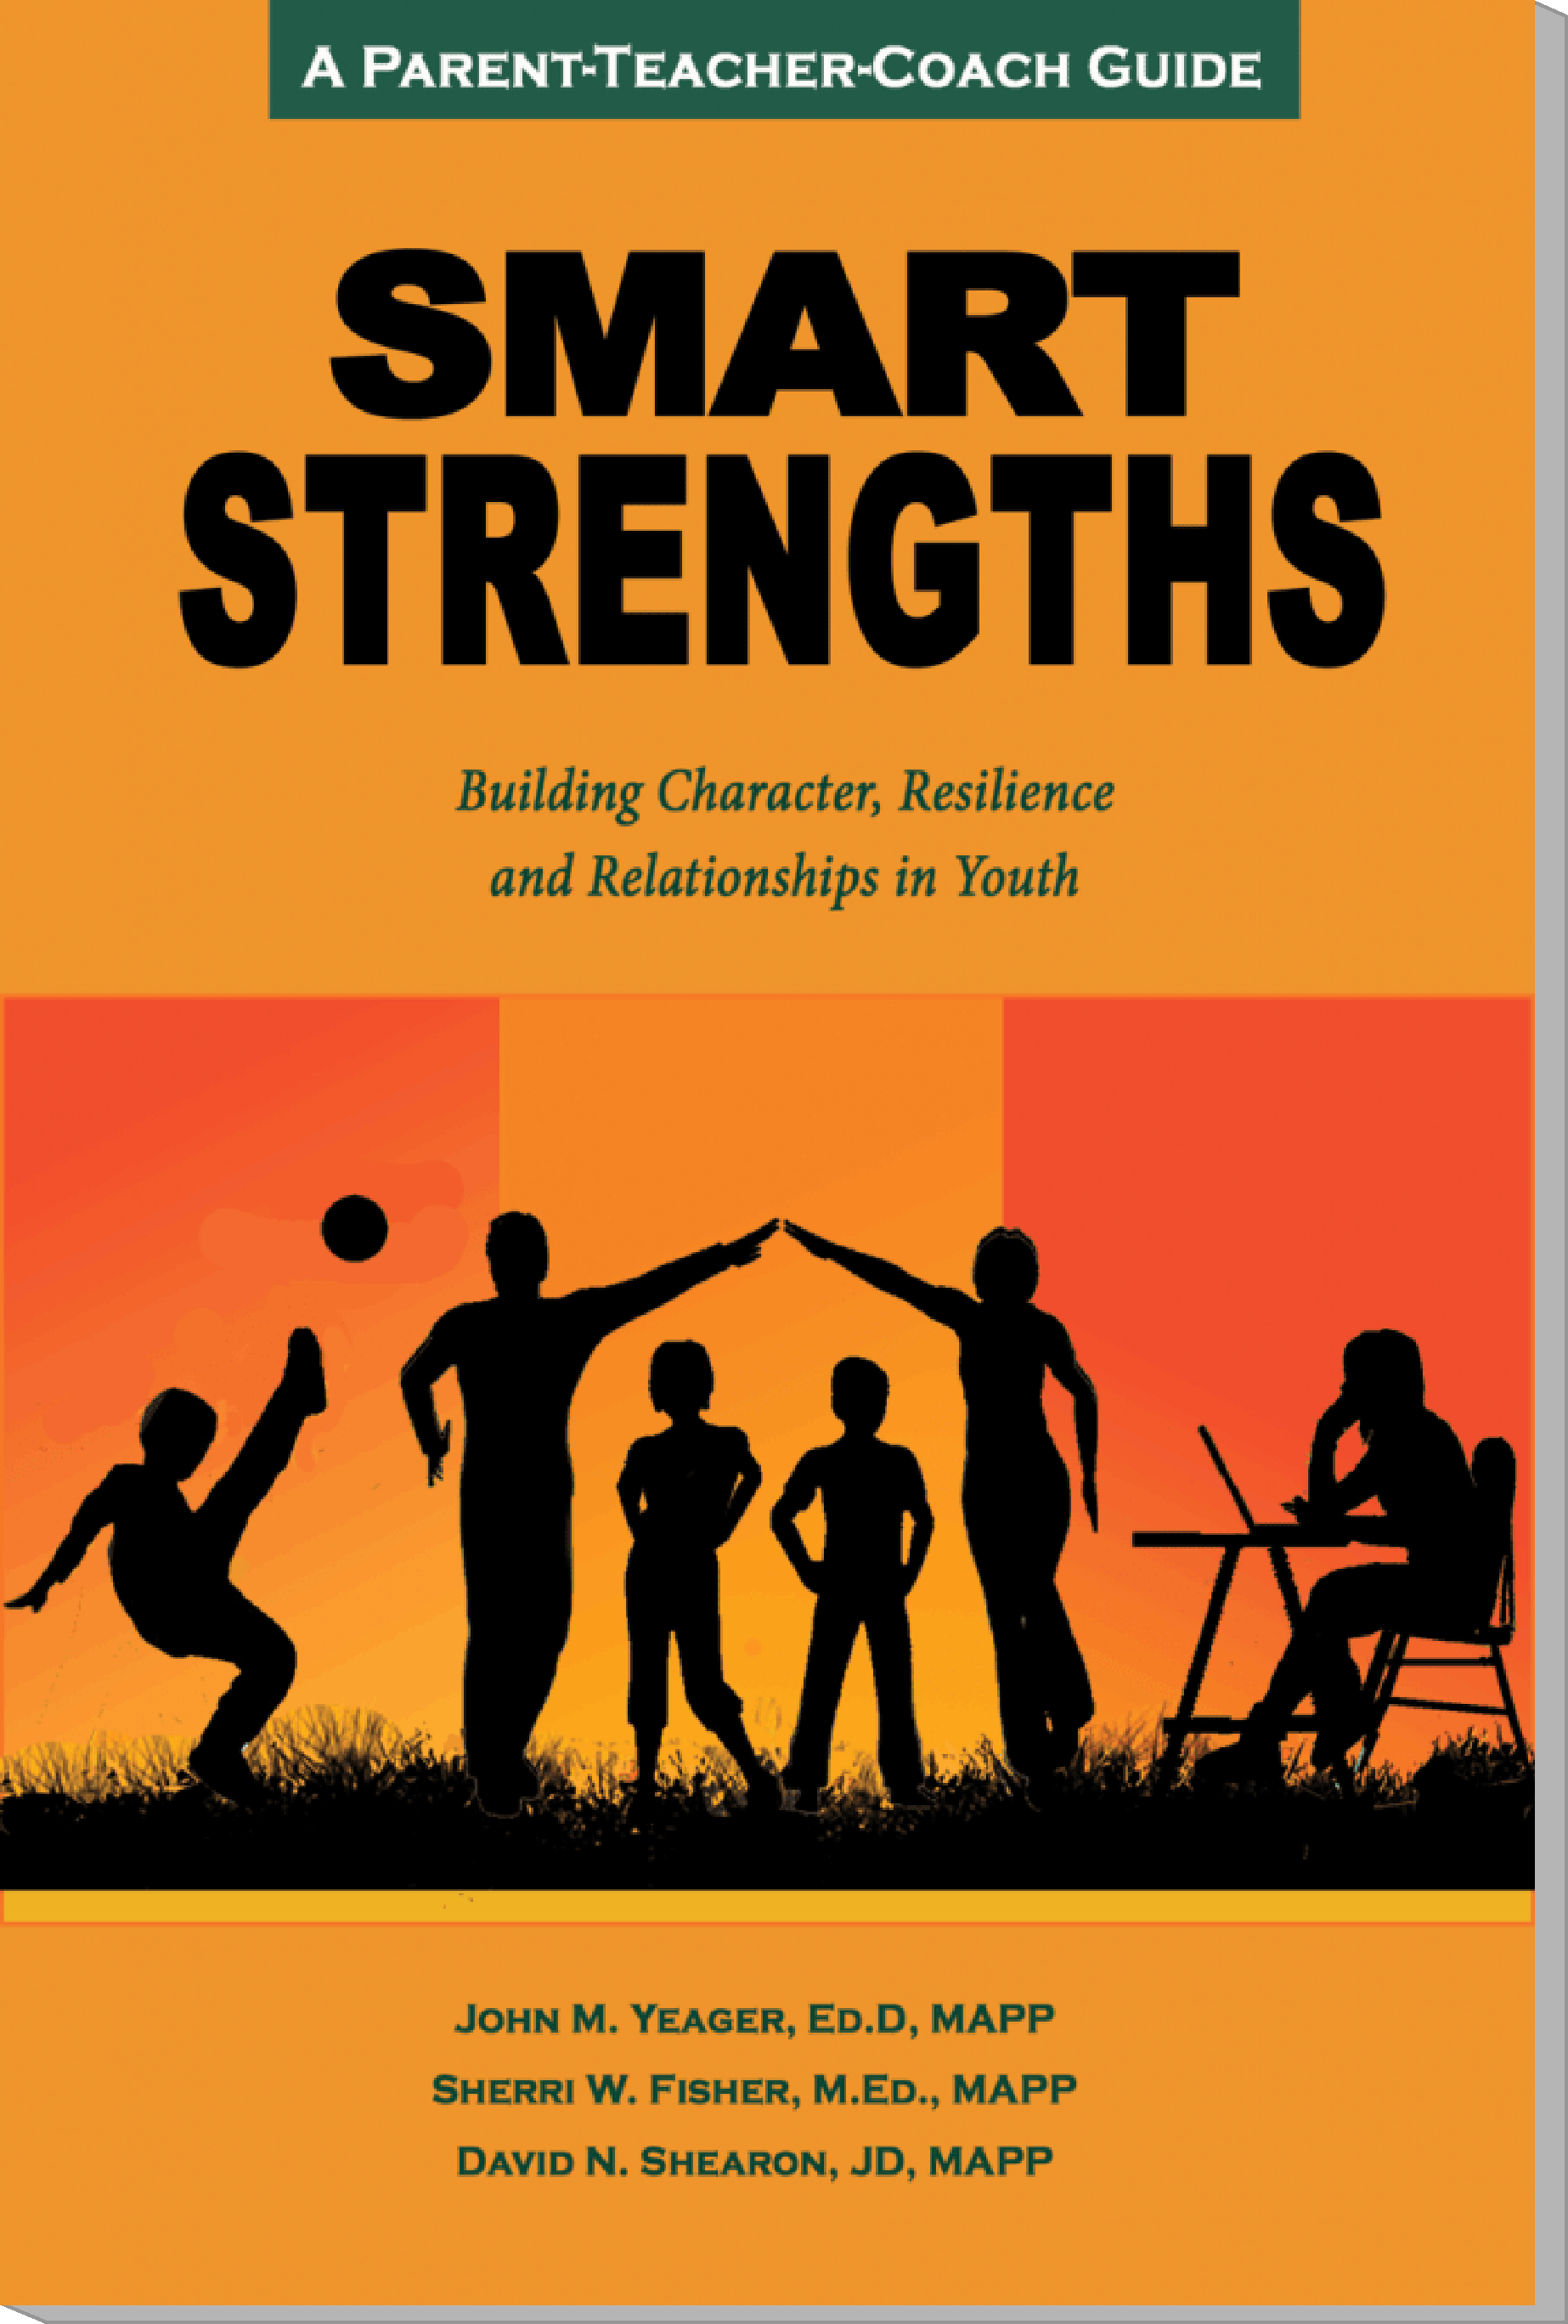 SMART Strengths book cover